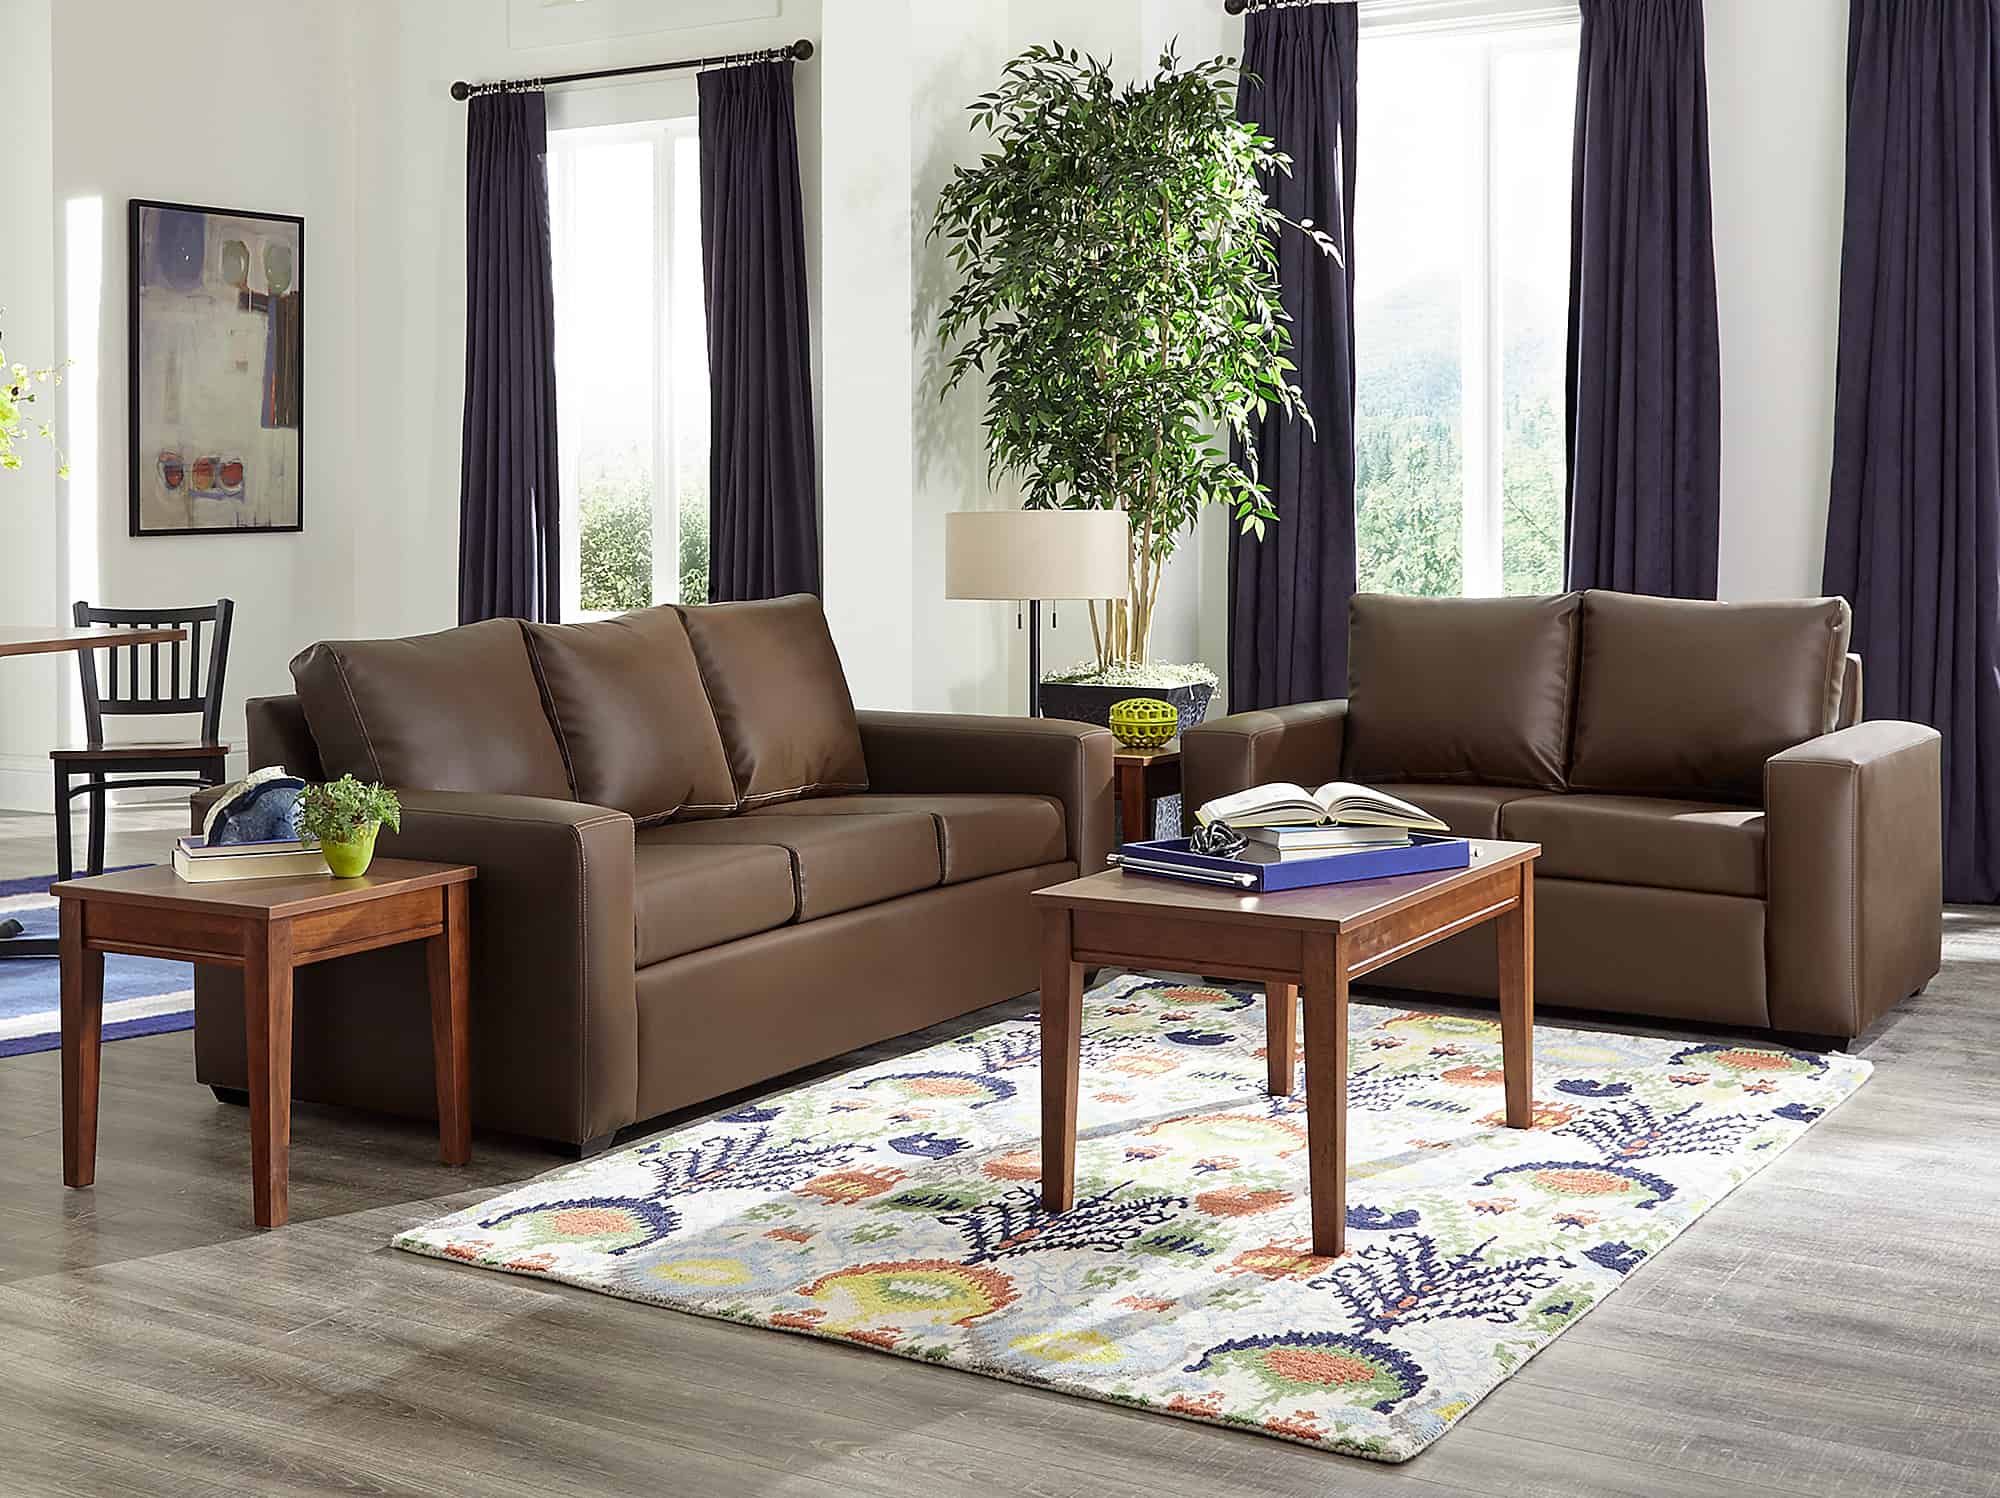 Canyon Sofa and Loveseat in living room setting